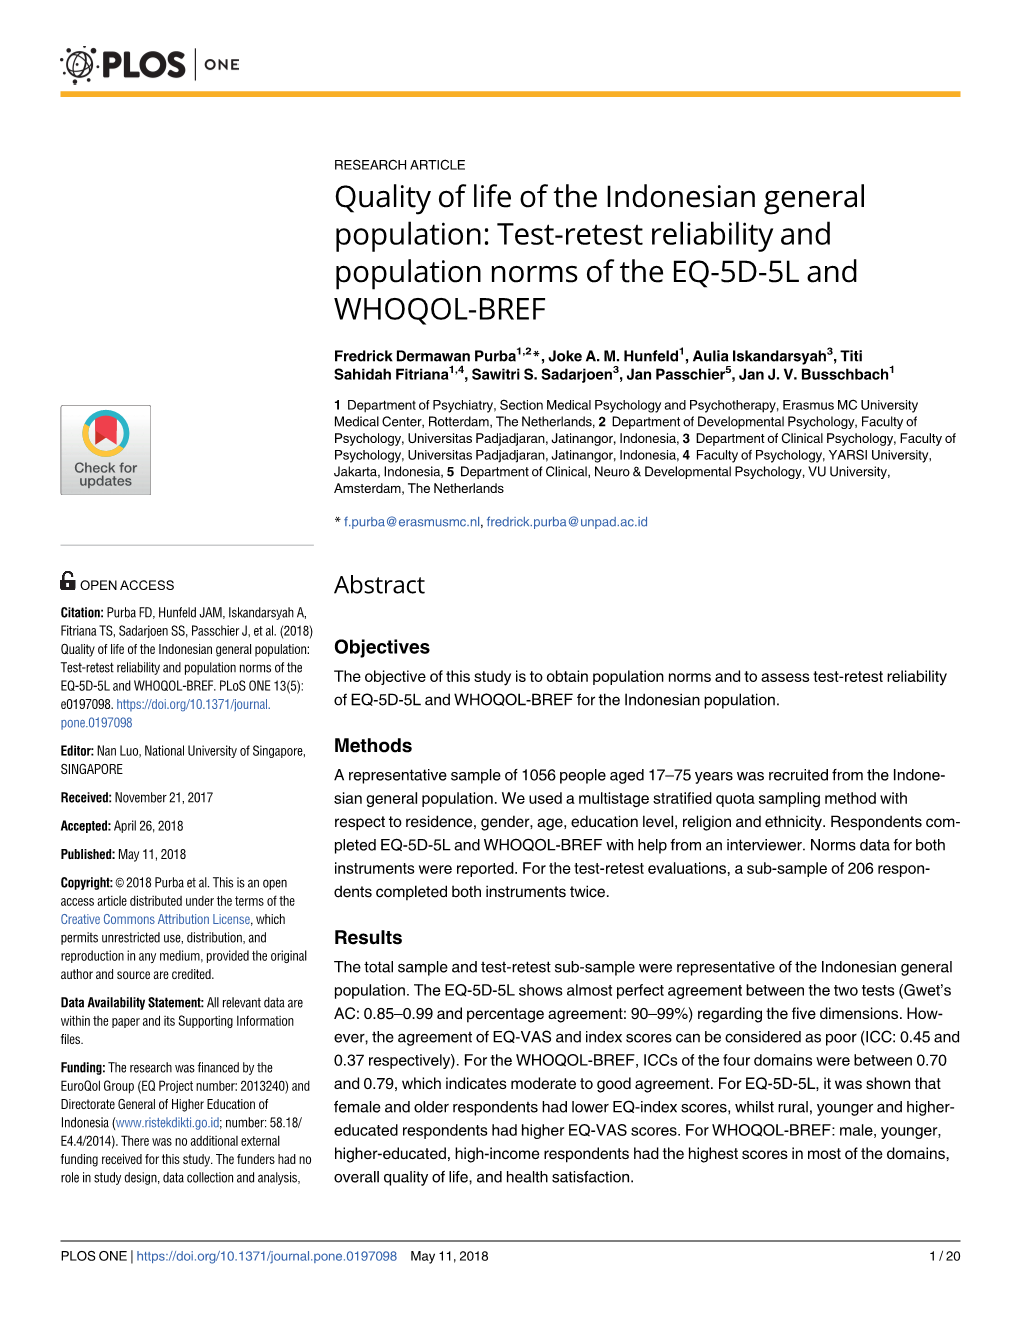 Test-Retest Reliability and Population Norms of the EQ-5D-5L and WHOQOL-BREF